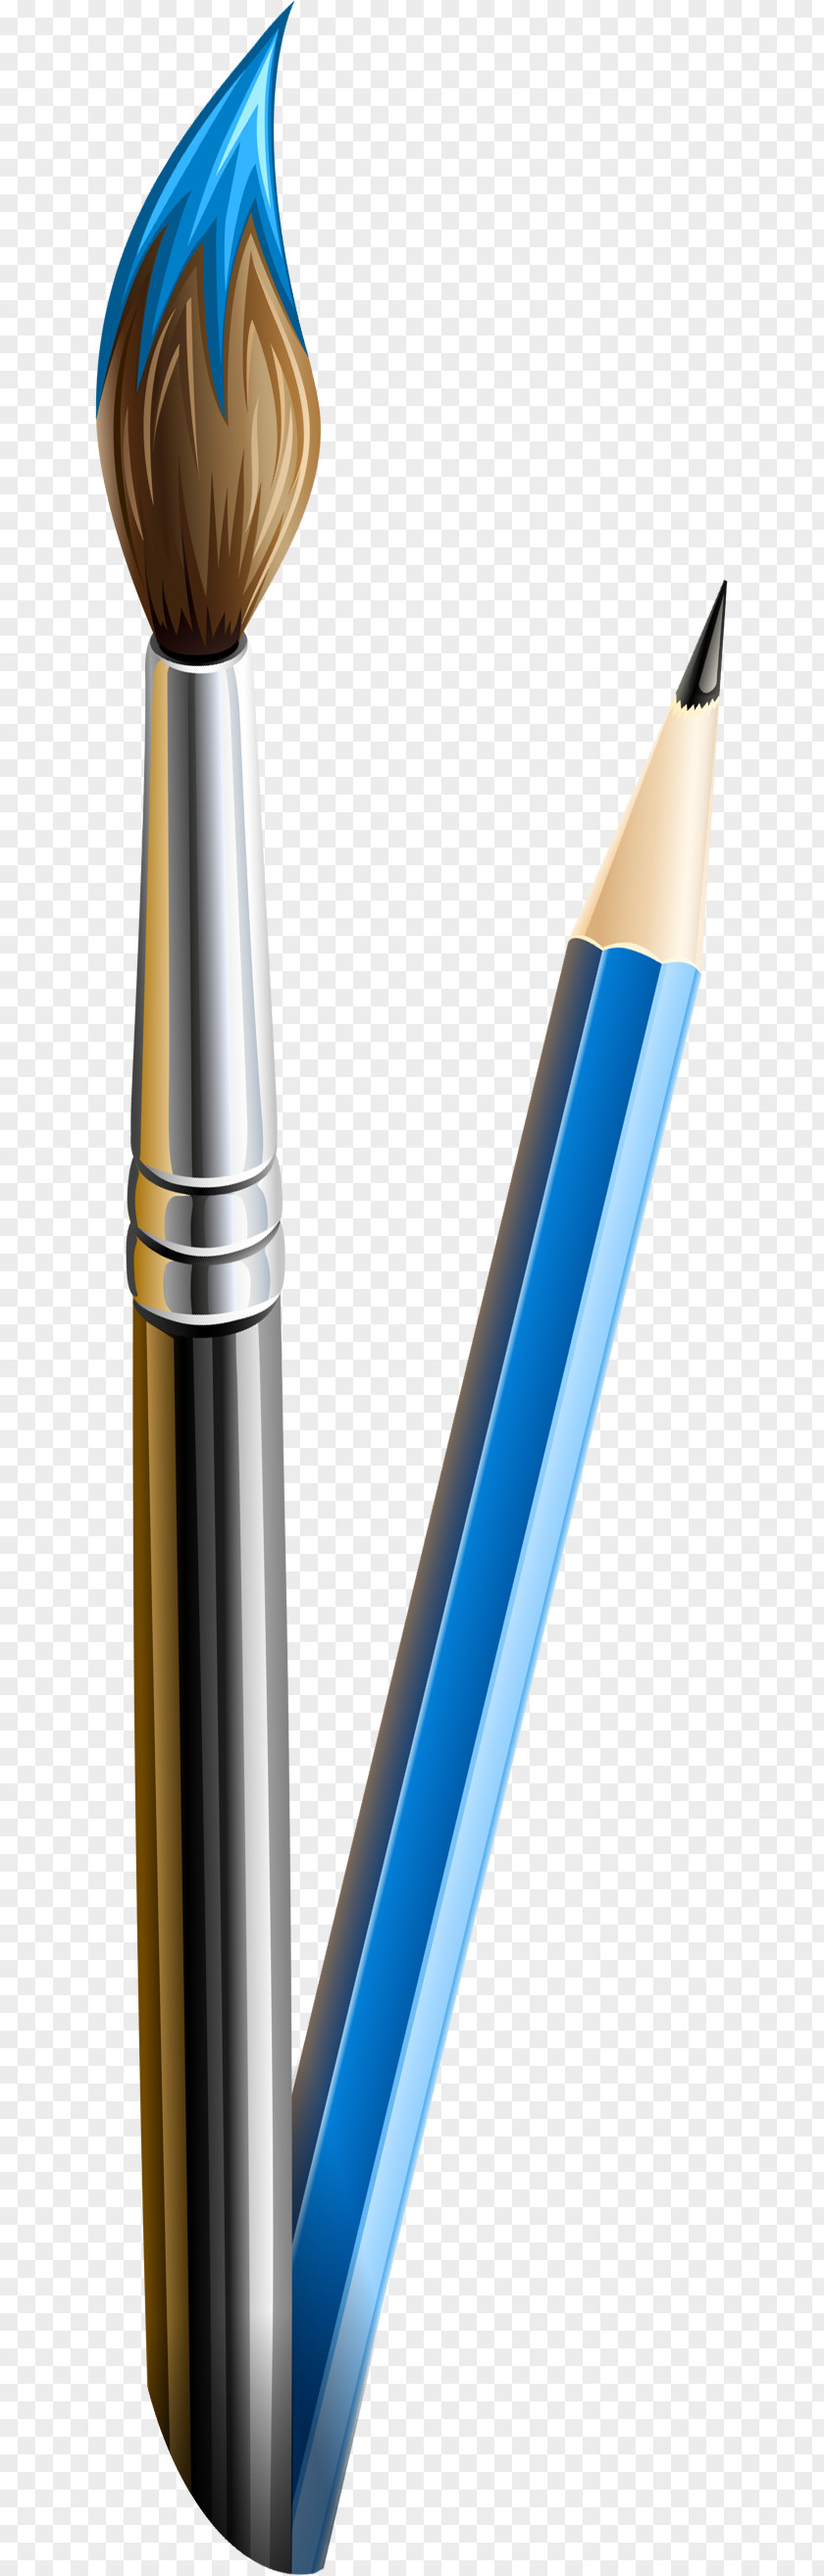 Brushes Pencil Office Supplies Paintbrush PNG